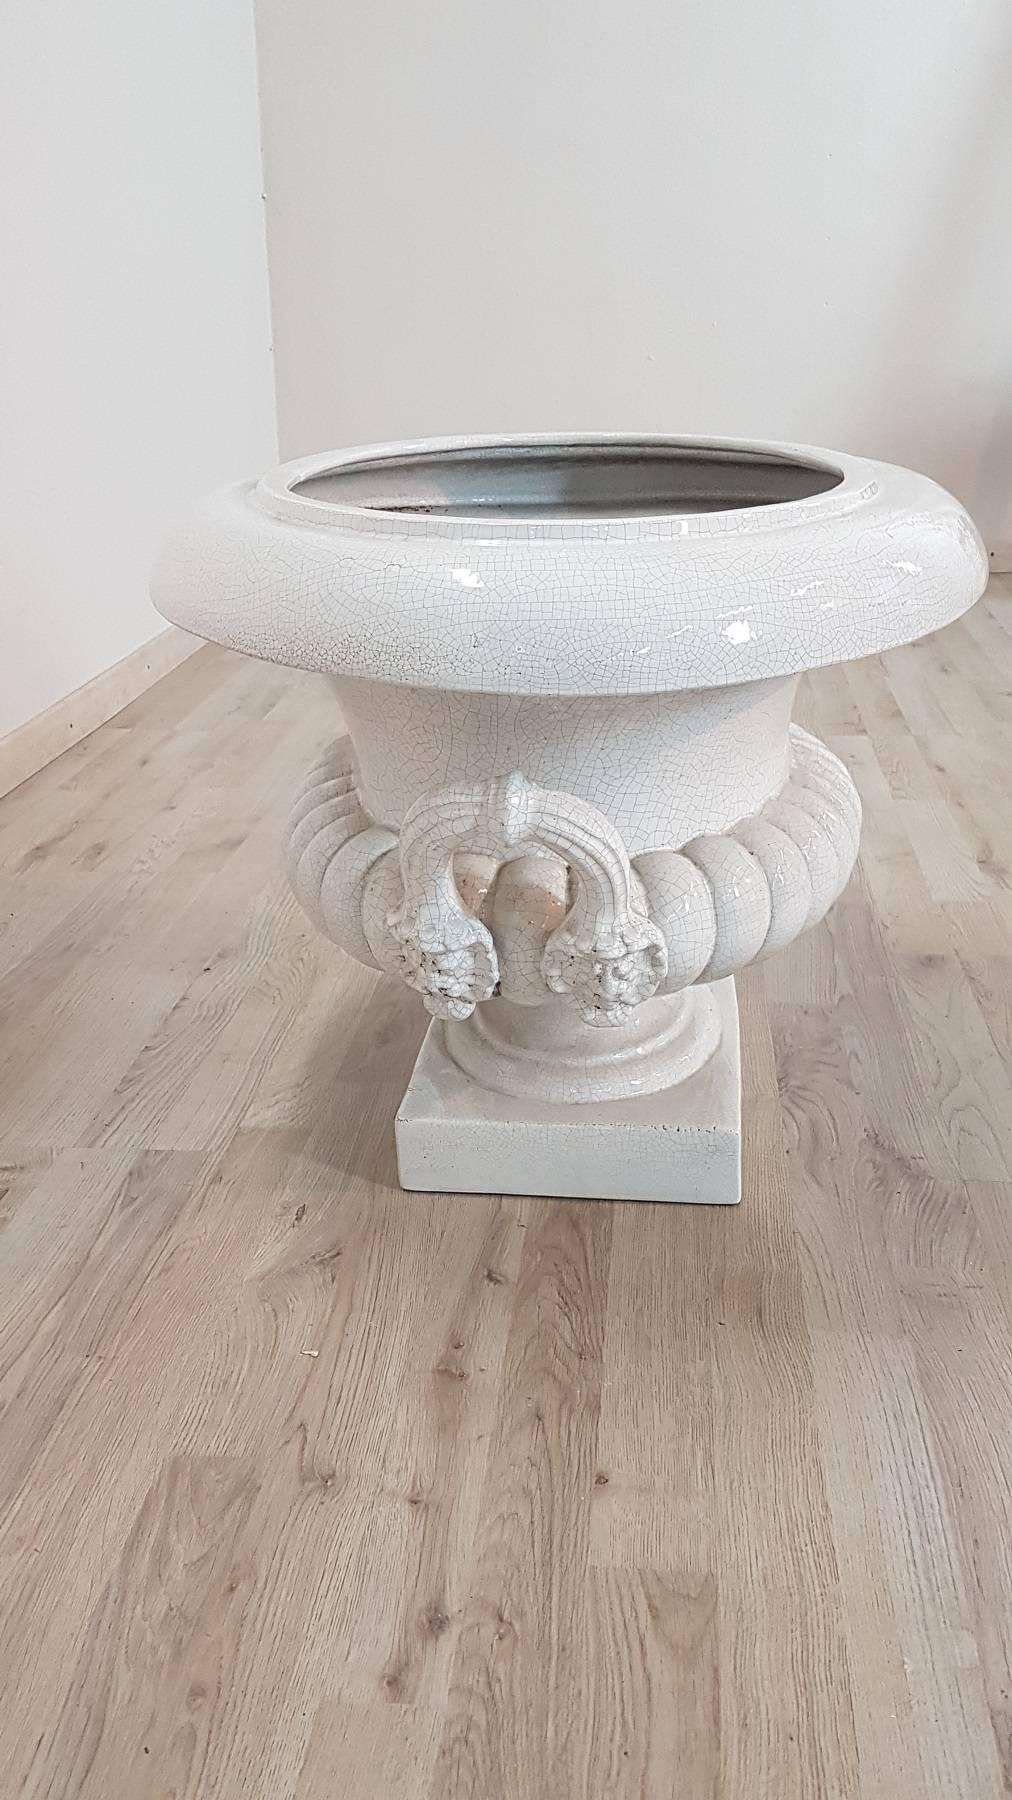 20th century large classic Italian vase in white ceramic.
Beautiful large white ceramic vase inside finely decorated with elegant and refined invoices. Ideal in any environment.
      